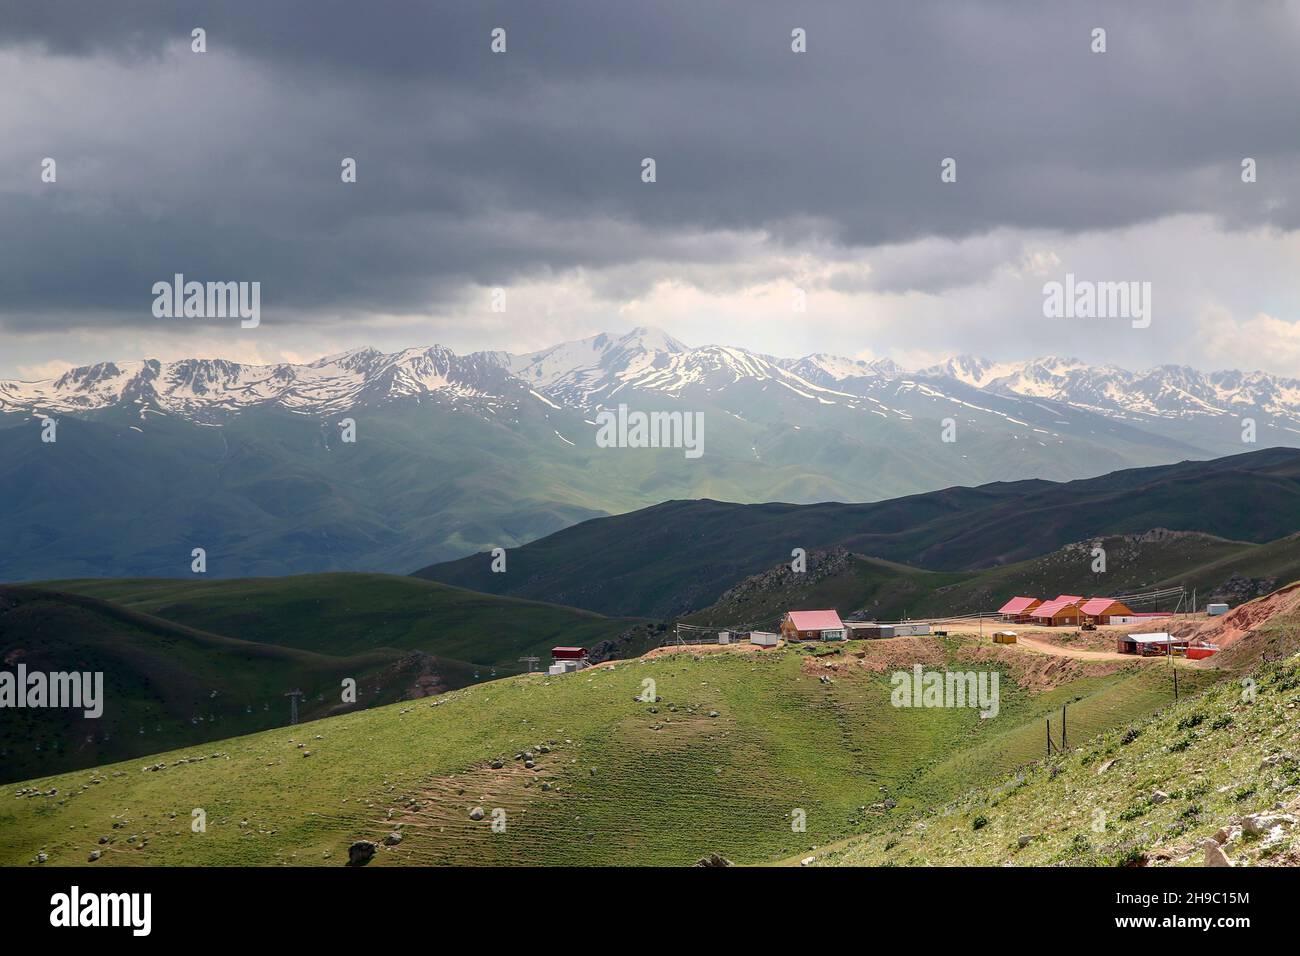 Kyrgyzstan, Suusamyr Valley lies at 2,000-2,500 meters above the sea level between Suusamyr Too and Kyrgyz Ala-Too ranges of Tian Shan mountains in Ce Stock Photo